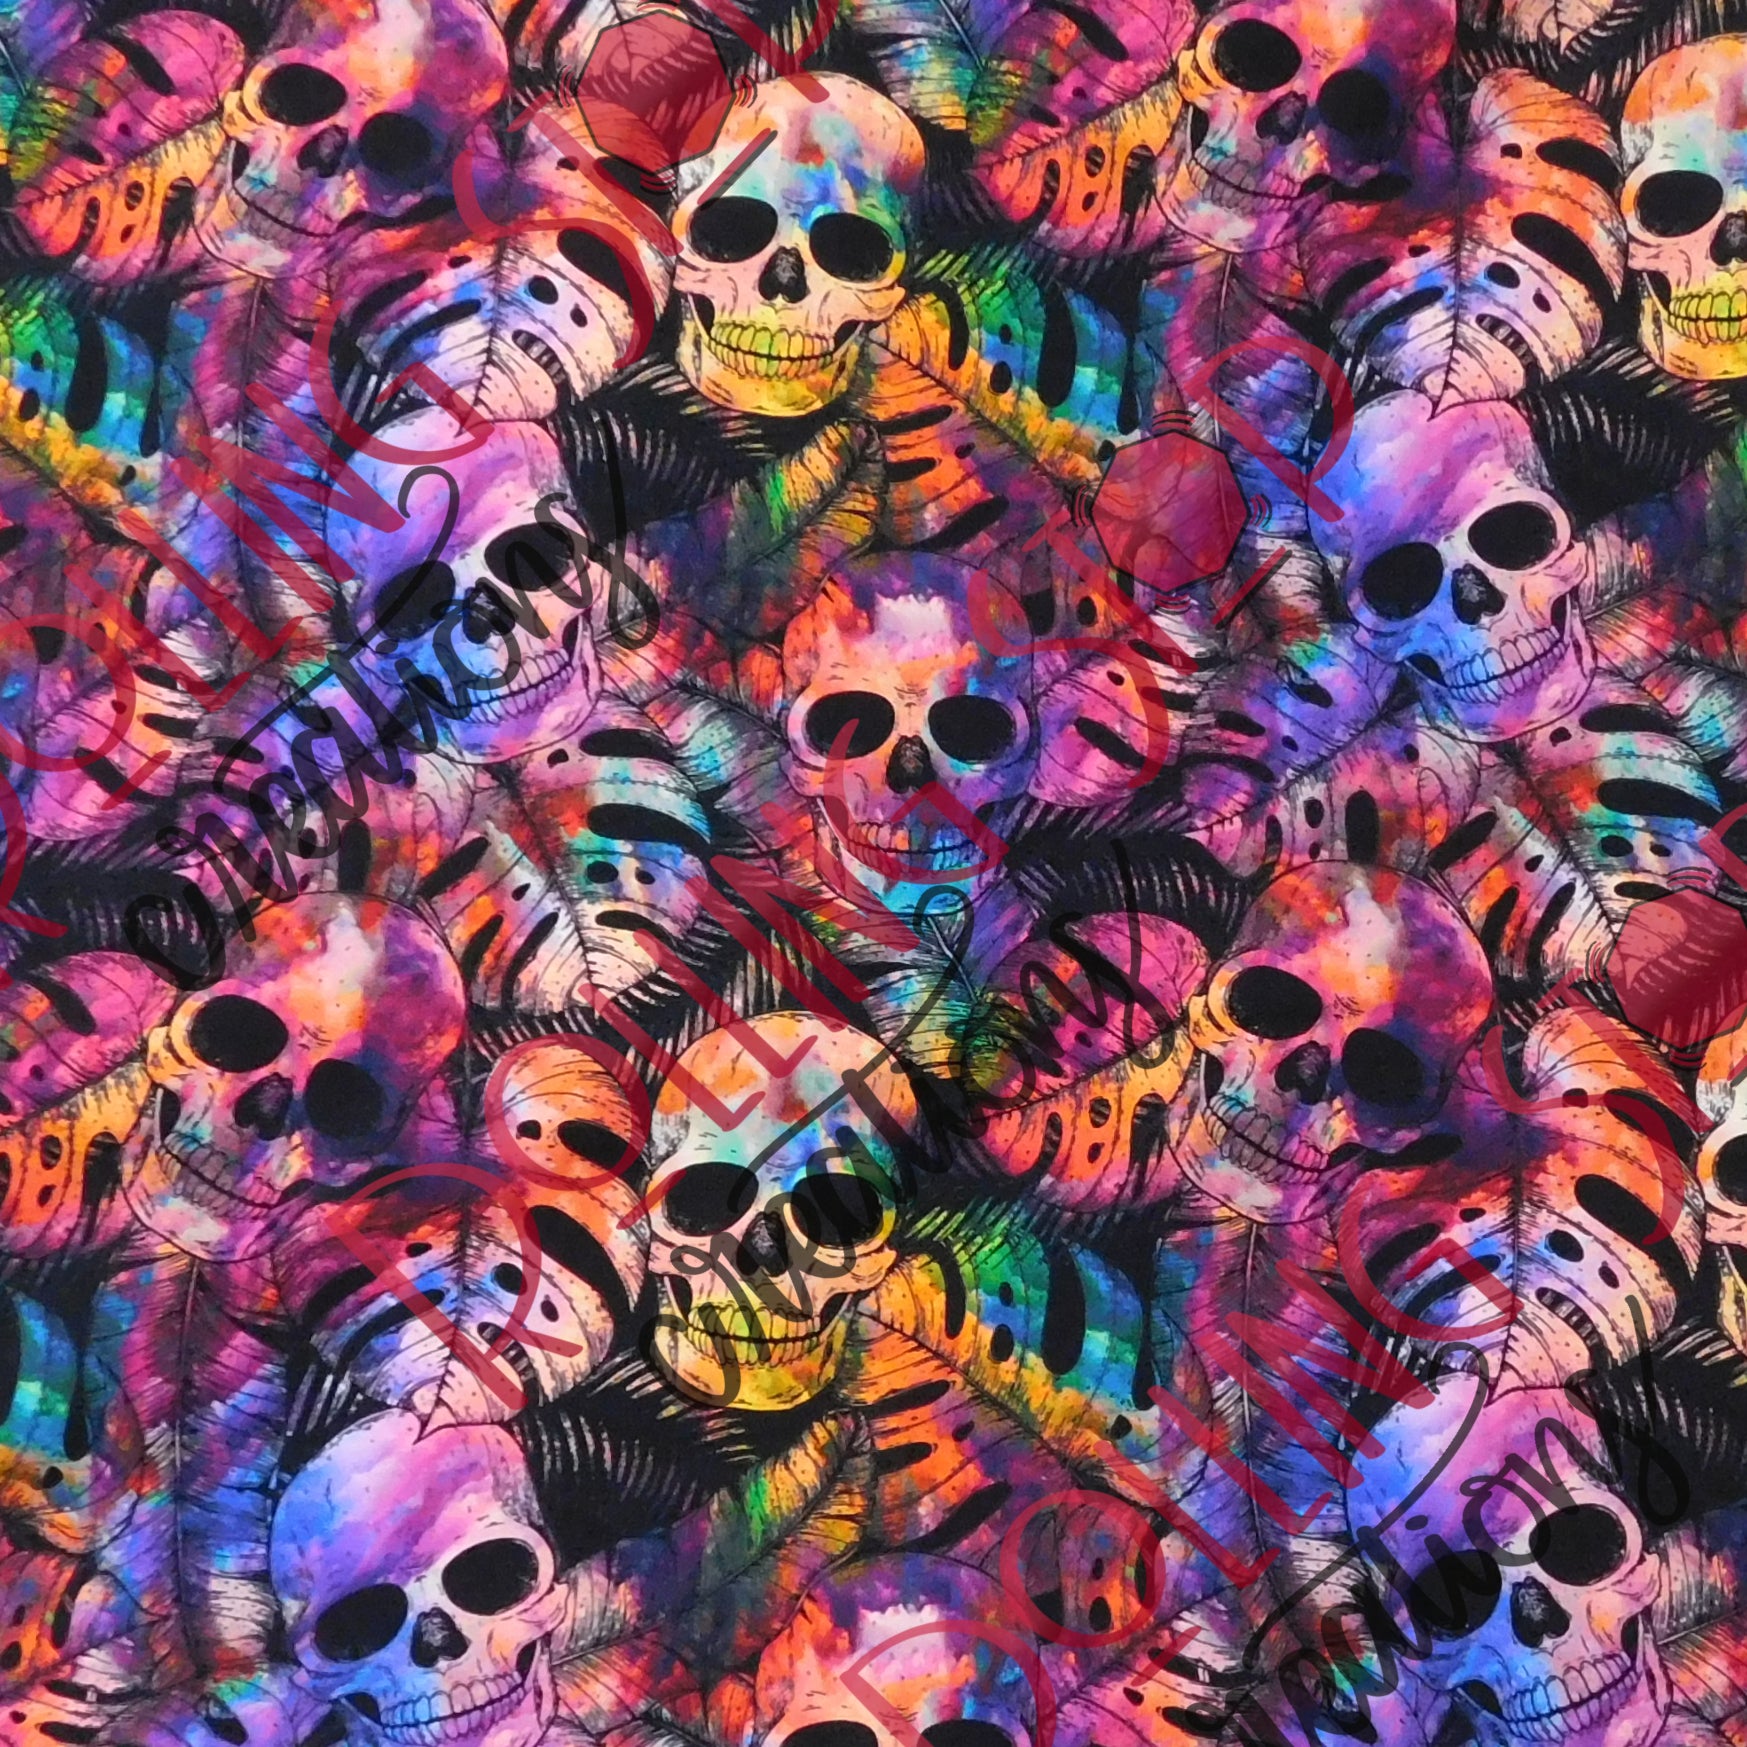 Rainbow Powder Monstera Skulls Everyday Jundies by Rolling Stop Creations sold by Rolling Stop Creations 